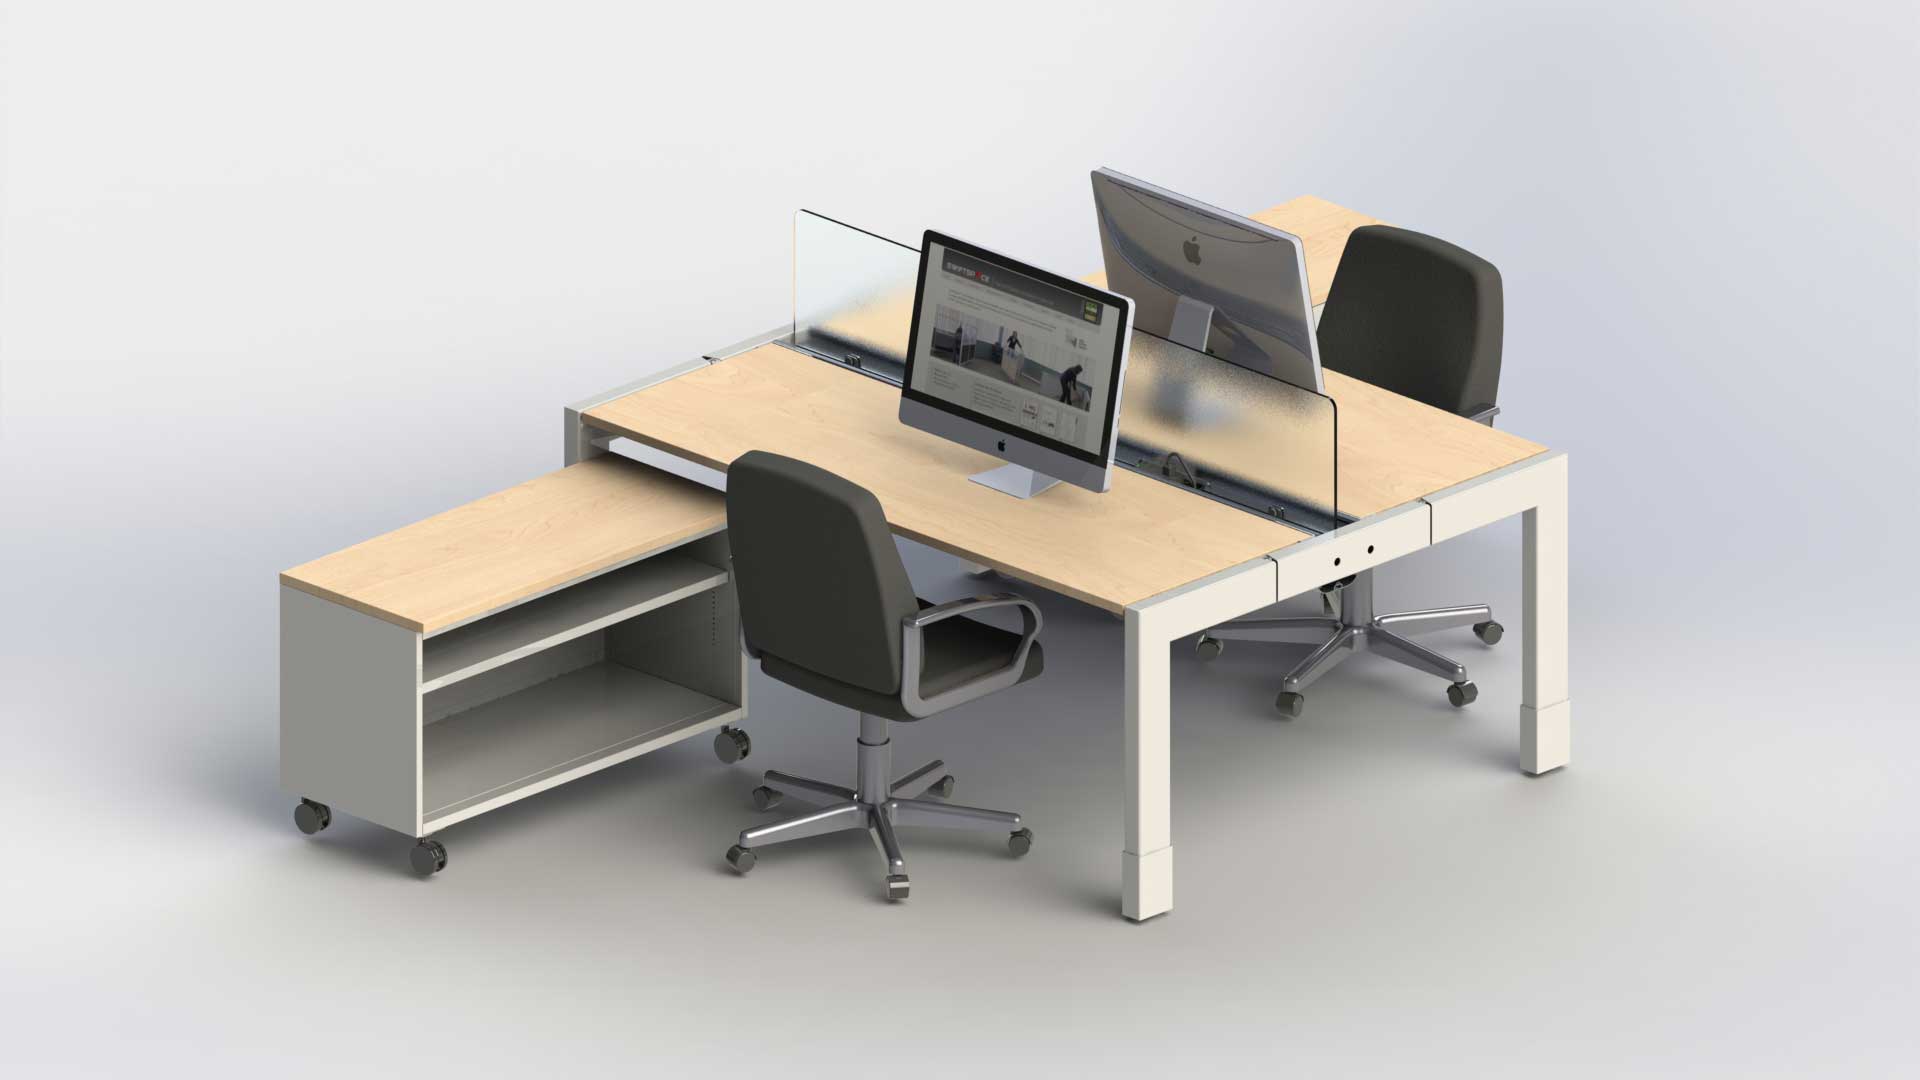 collaborative workstations featured